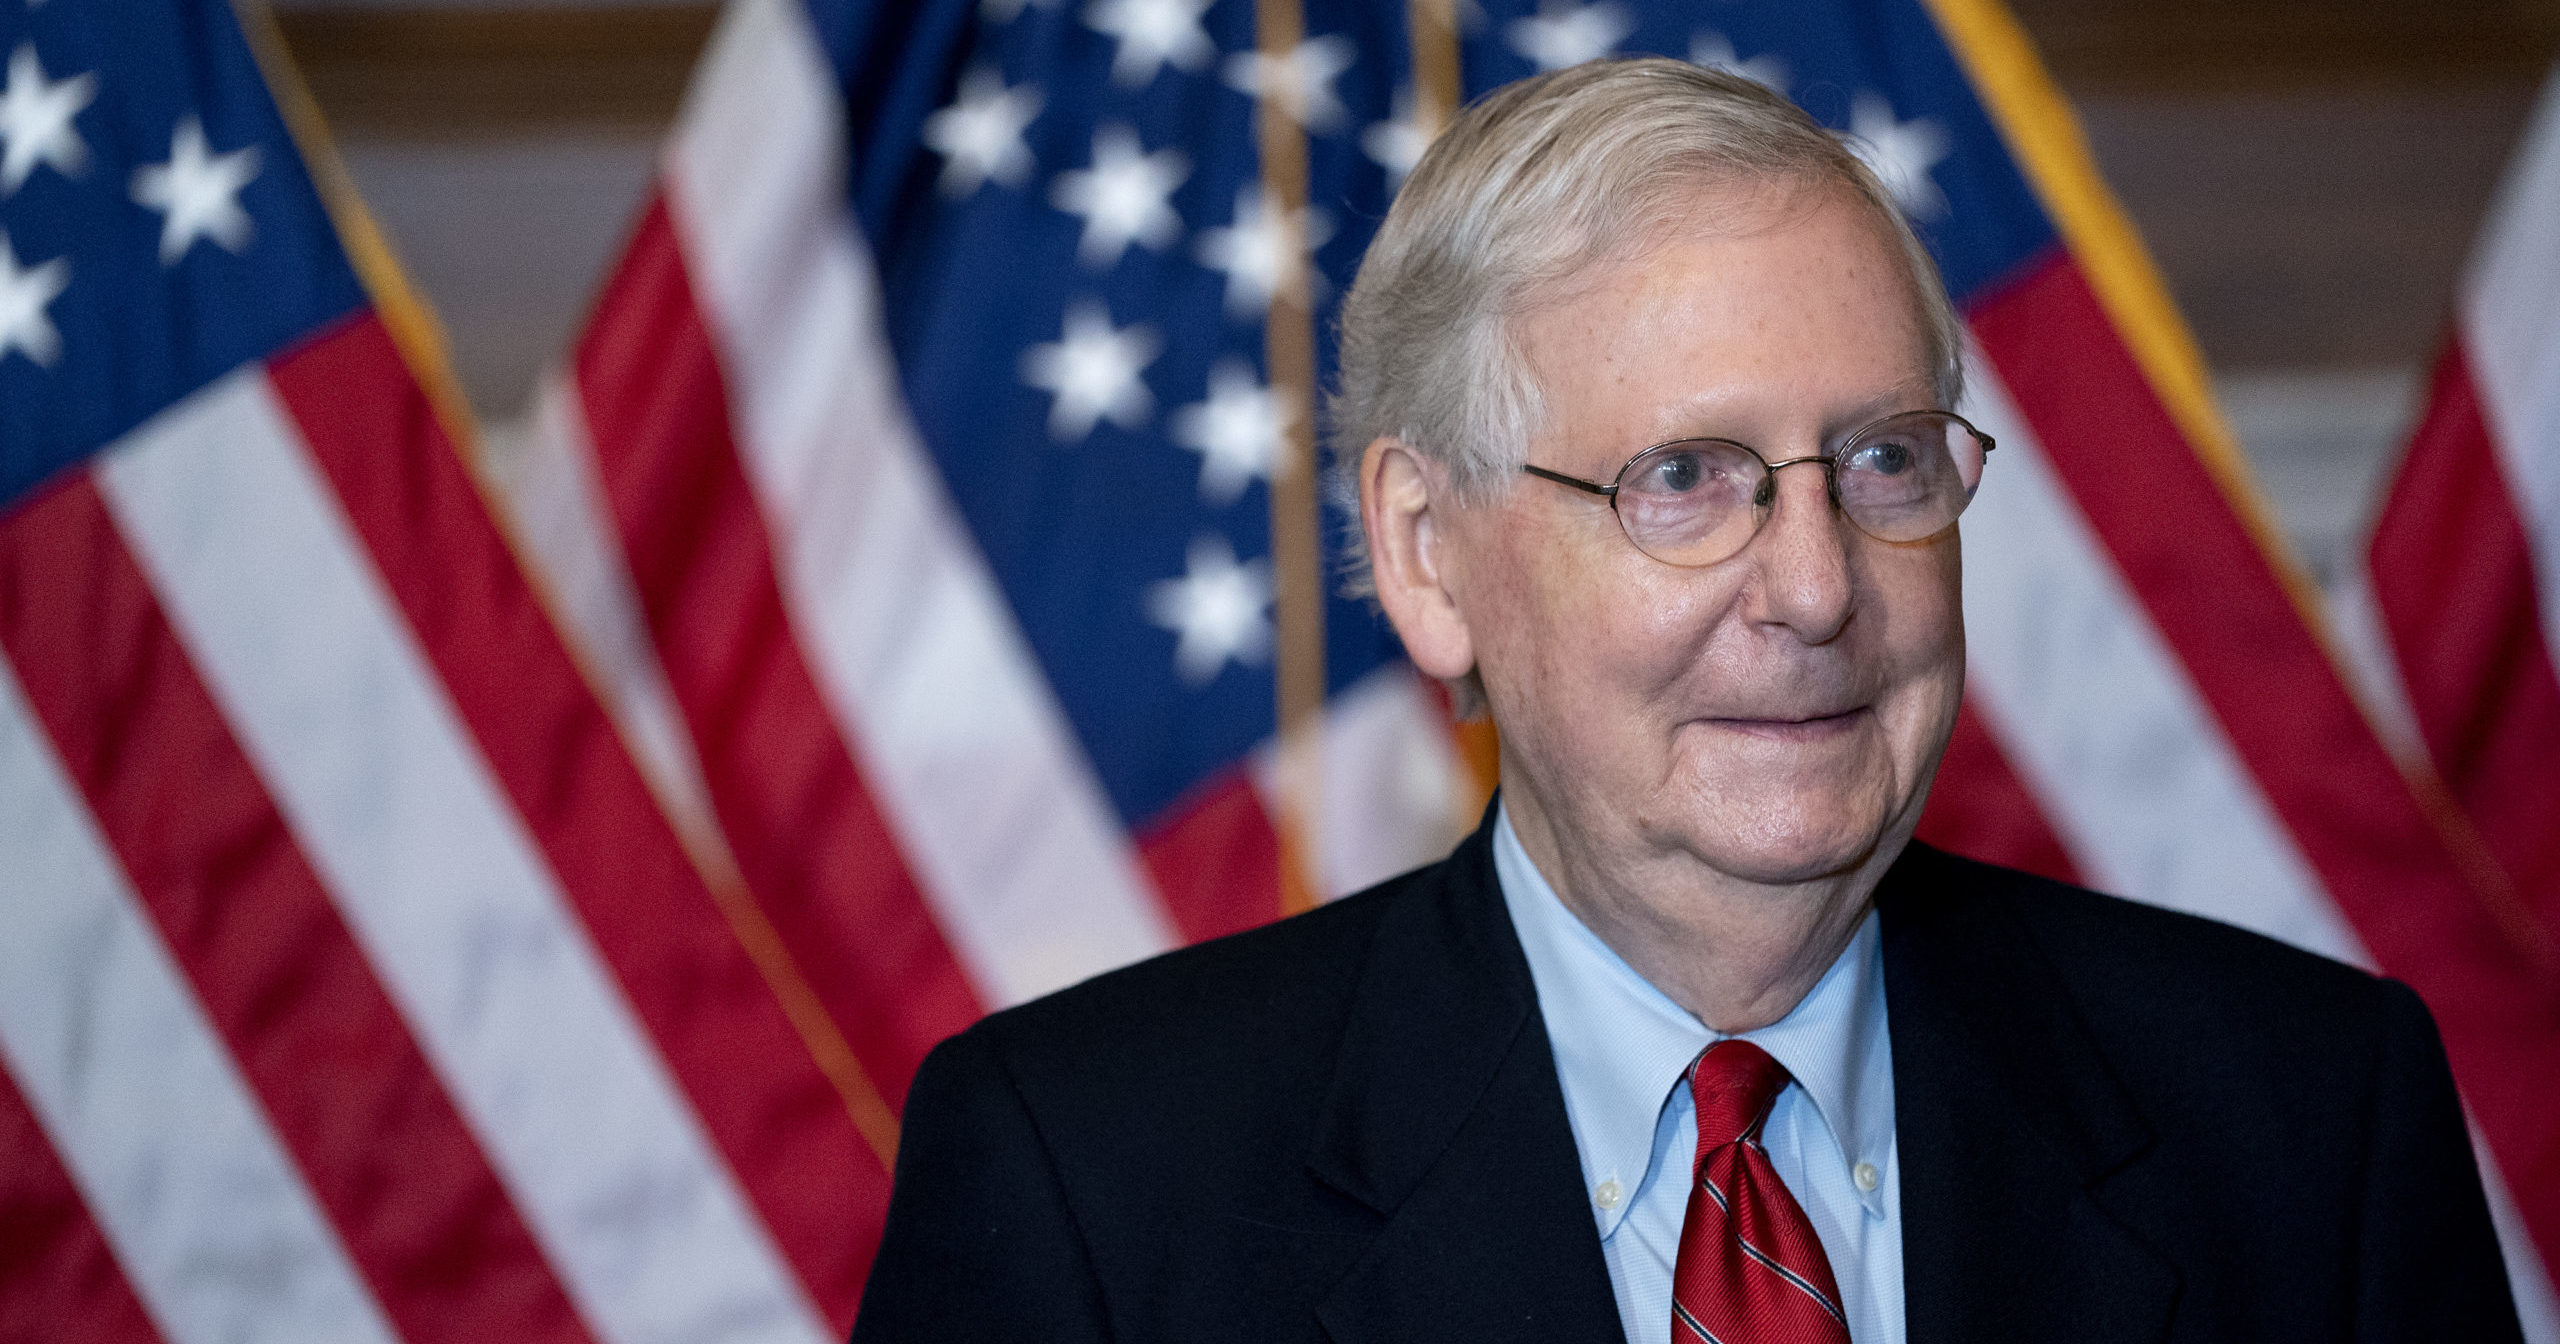 Sens. Mitch McConnell and Chuck Schumer were chosen to lead their parties in the Senate.